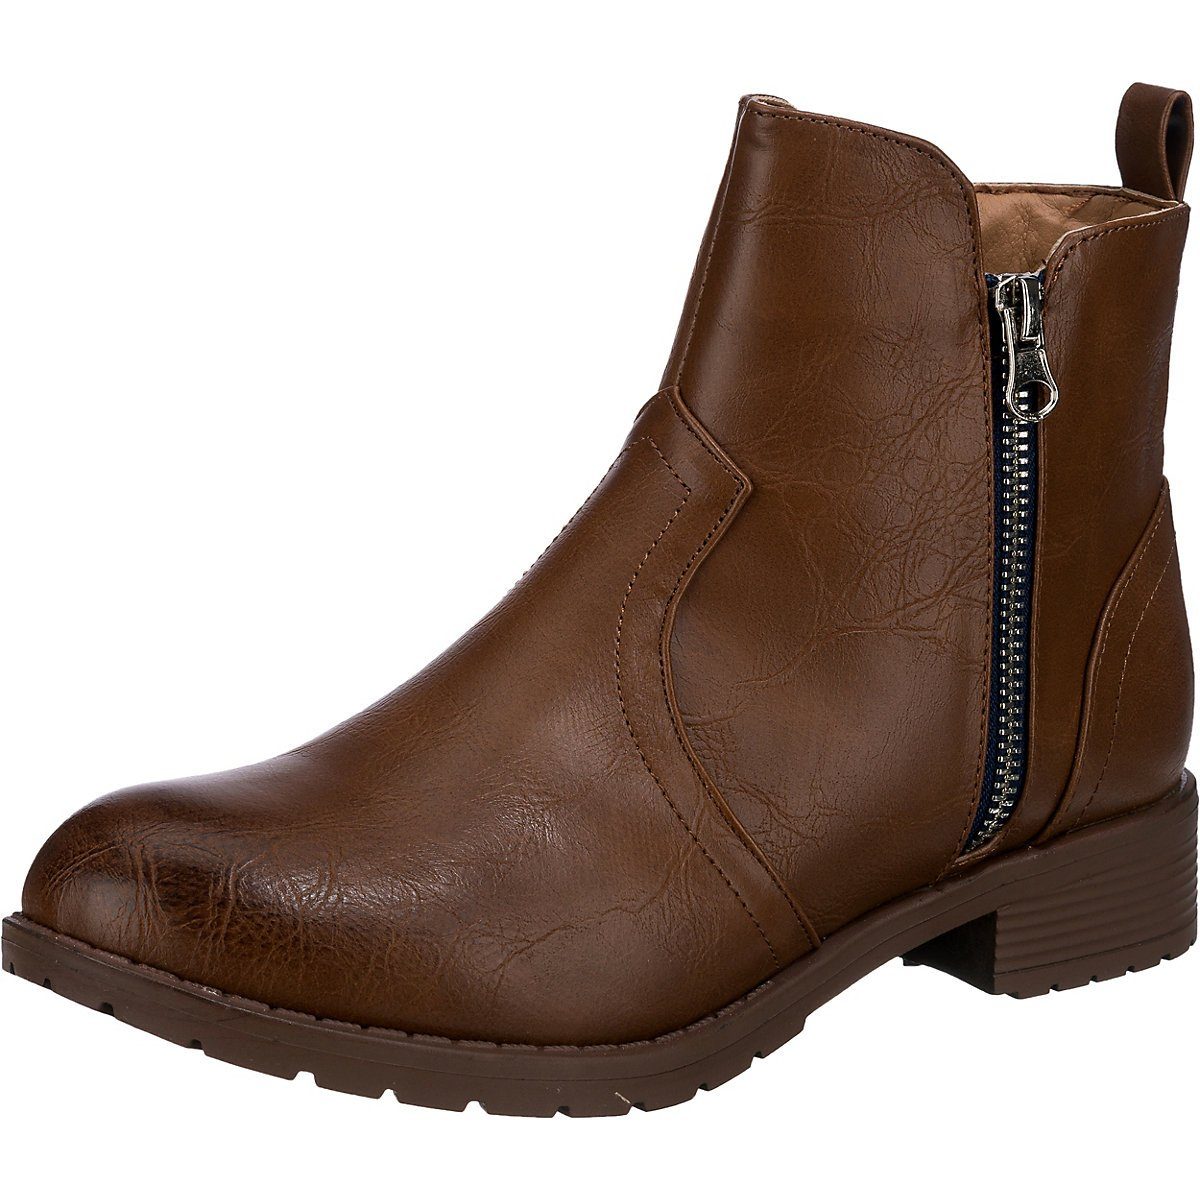 Schuhe Stiefeletten Inselhauptstadt Classic Insel Ankle Boots Stiefelette